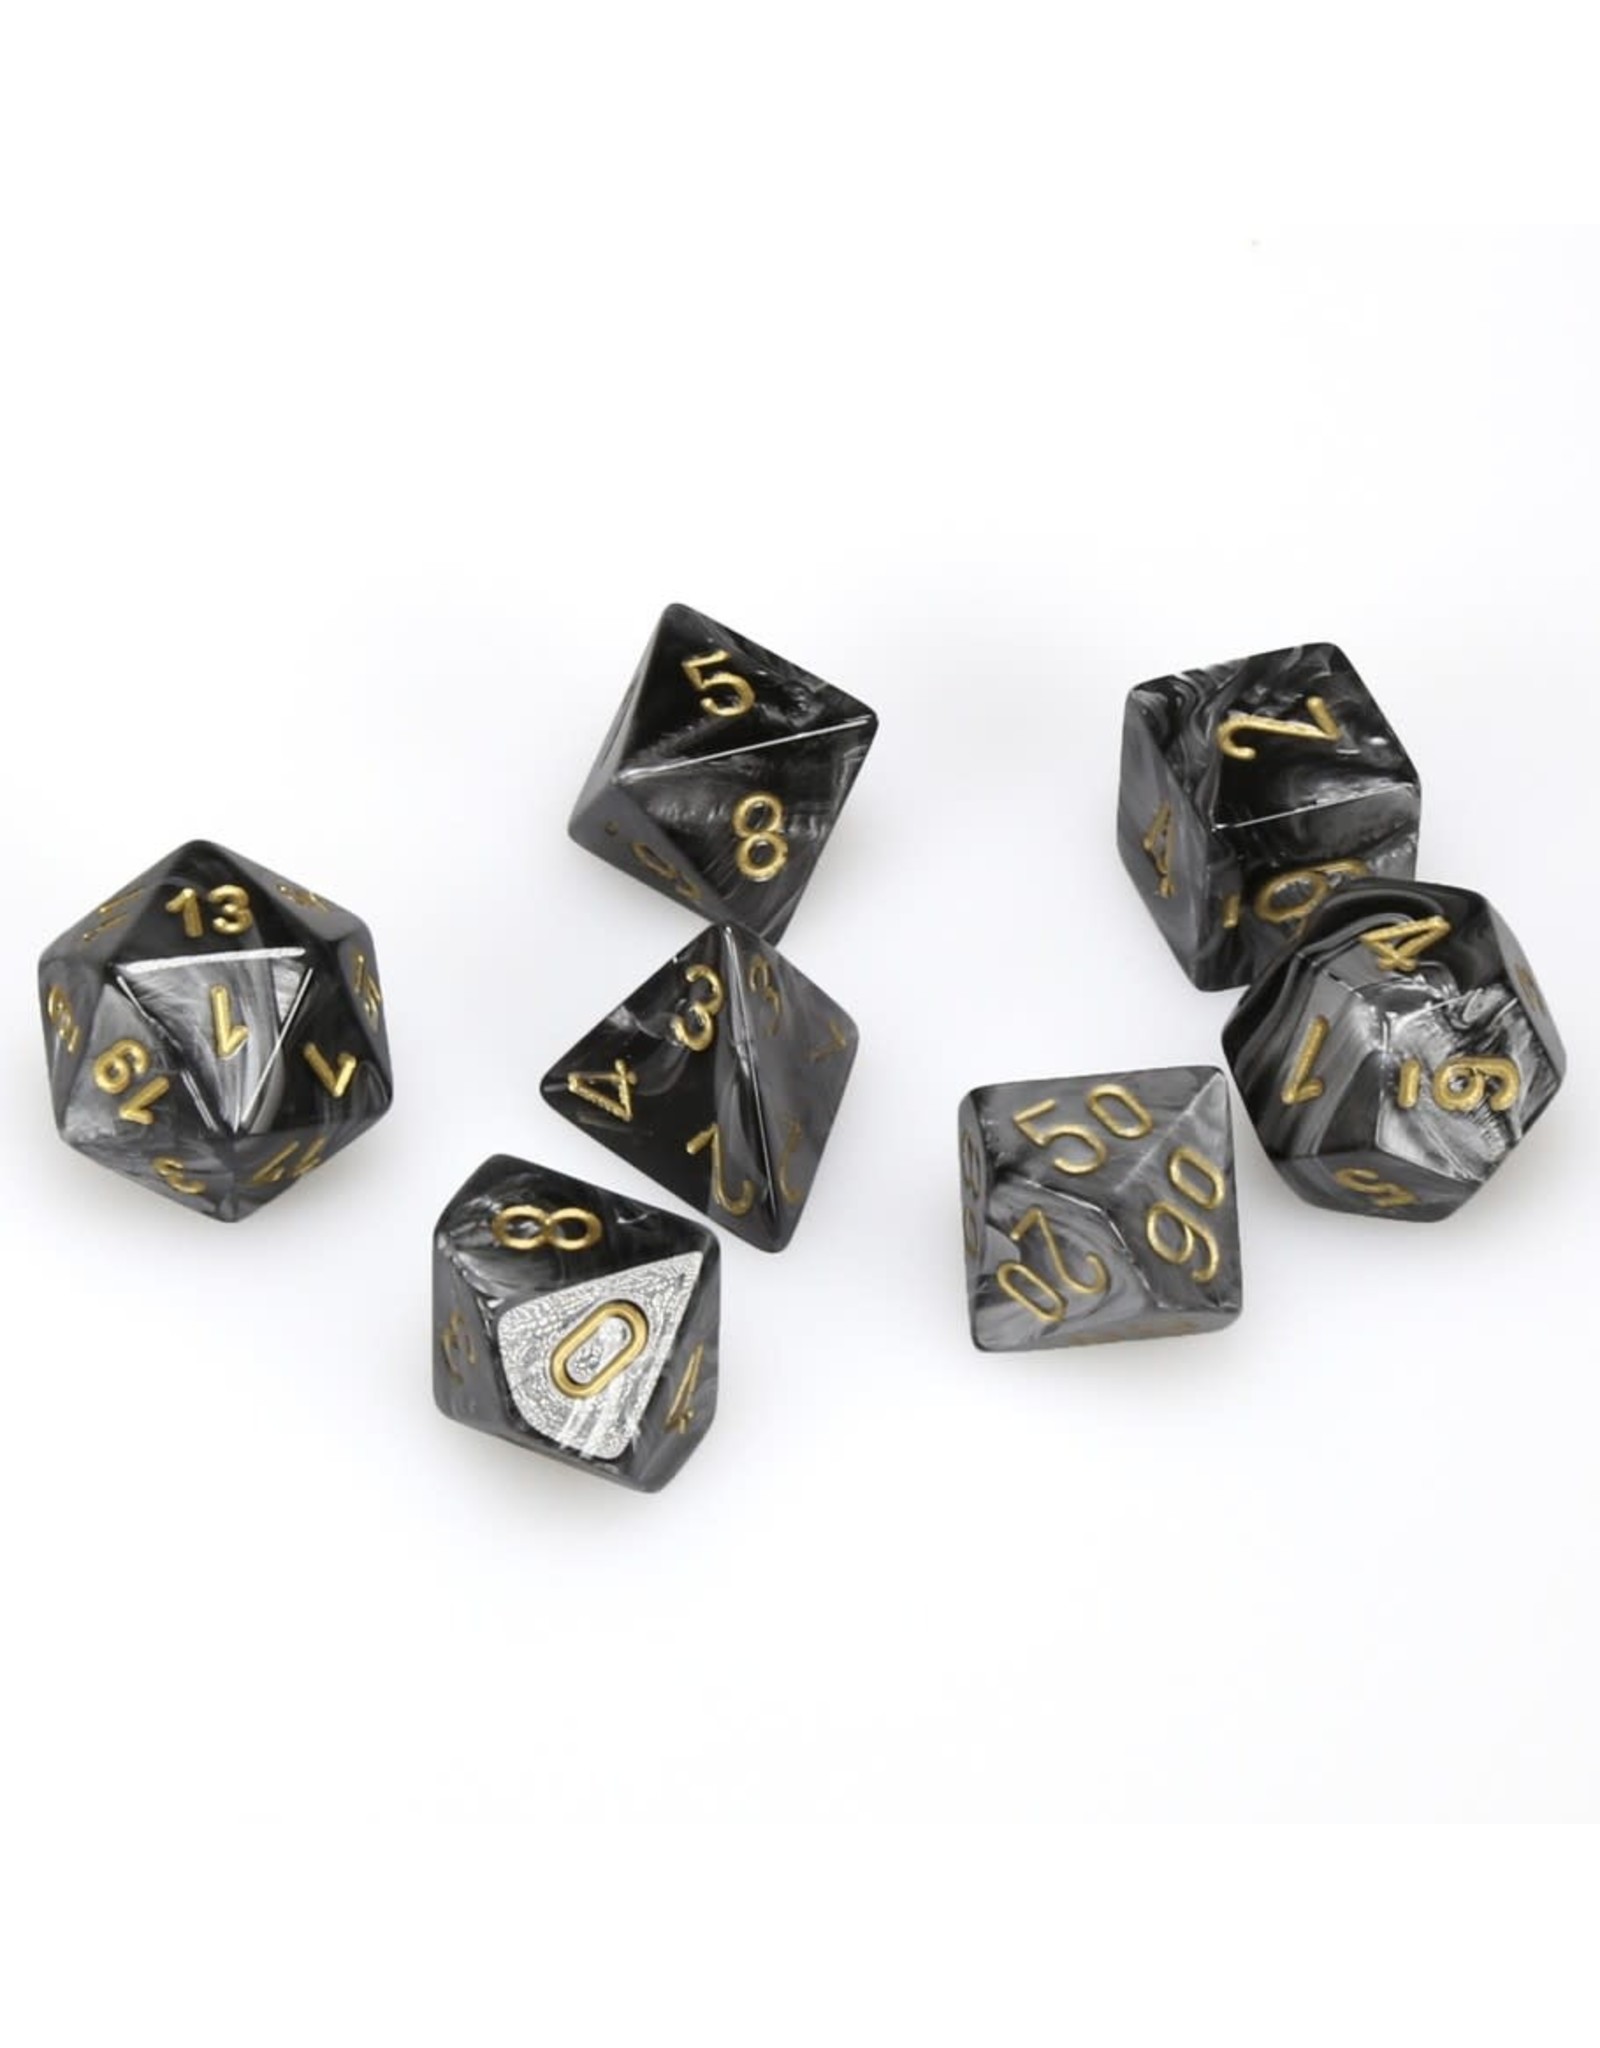 Chessex Polyhedral 7 Dice Set Lustrous Black w/Gold CHX27498